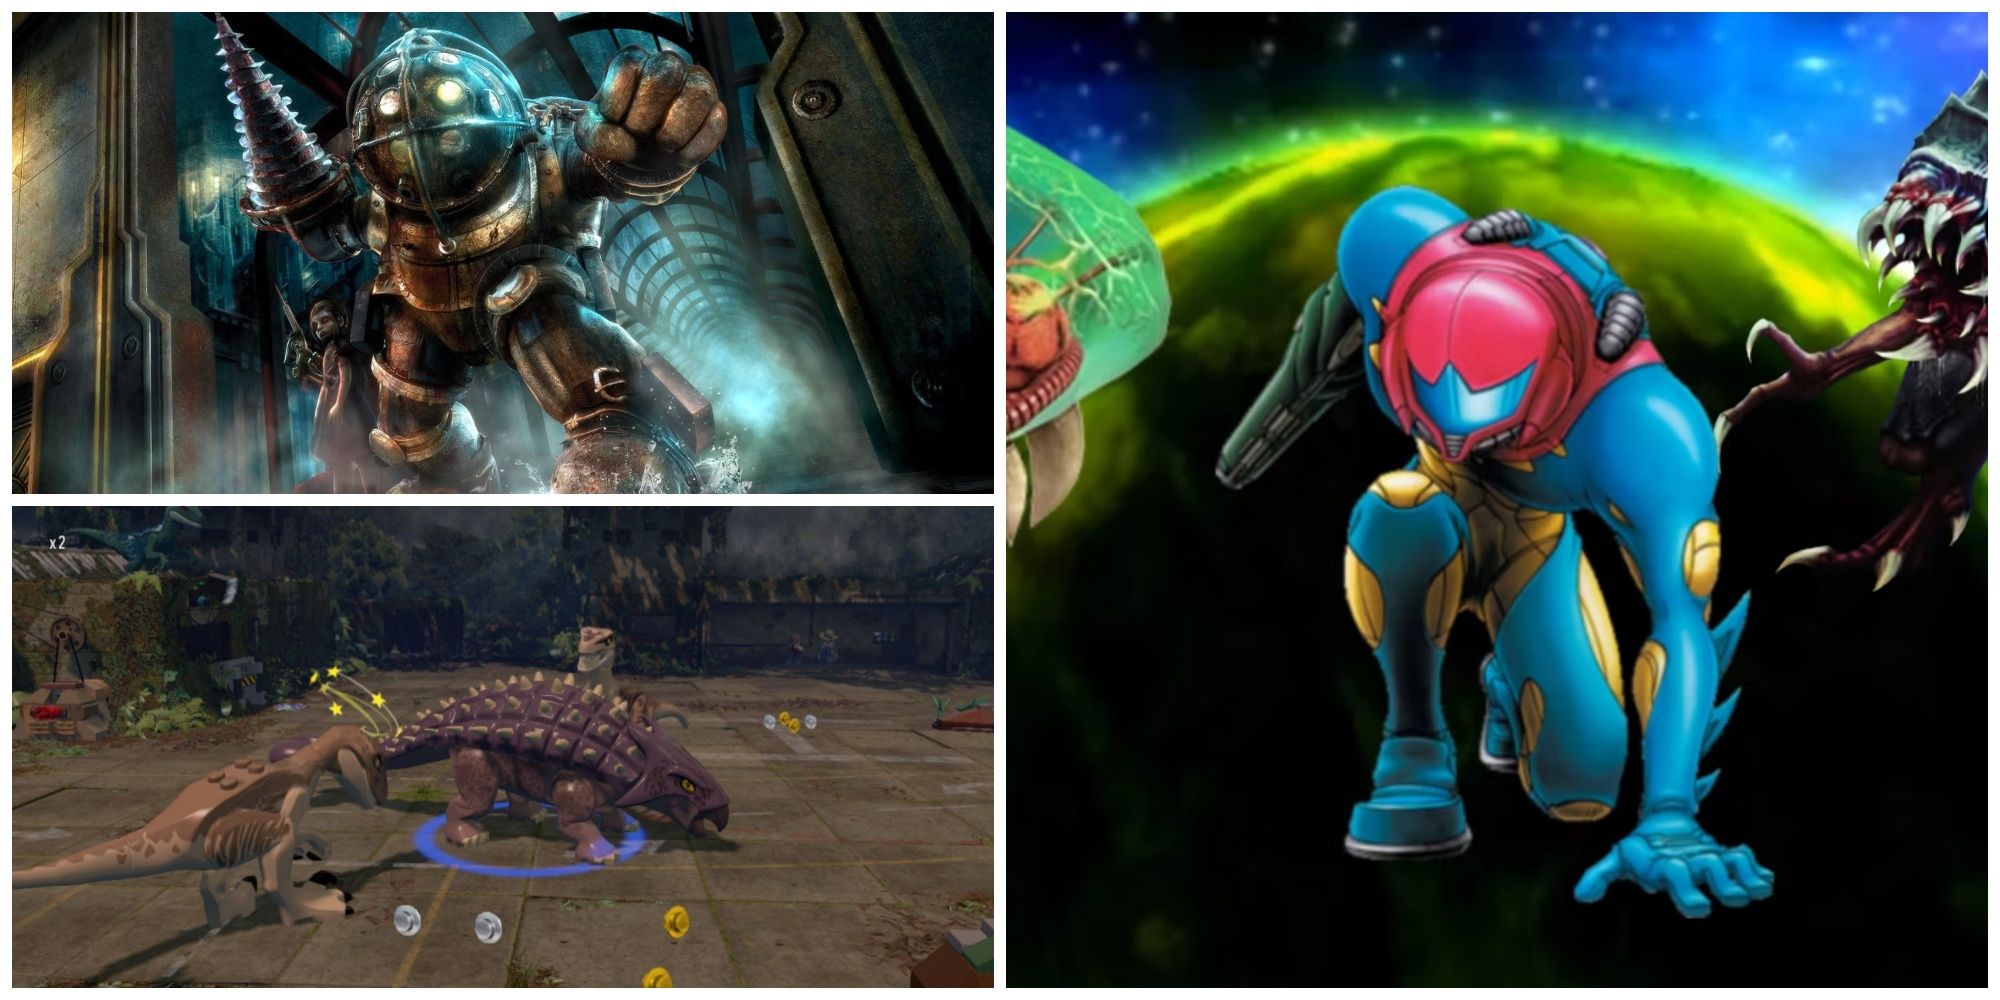 Top-Left: A Big Daddy from BioShock. Bottom-Left: Two dinosaurs from Jurassic World. Right: Samus in her blue Fusion Suit from Metroid Fusion.